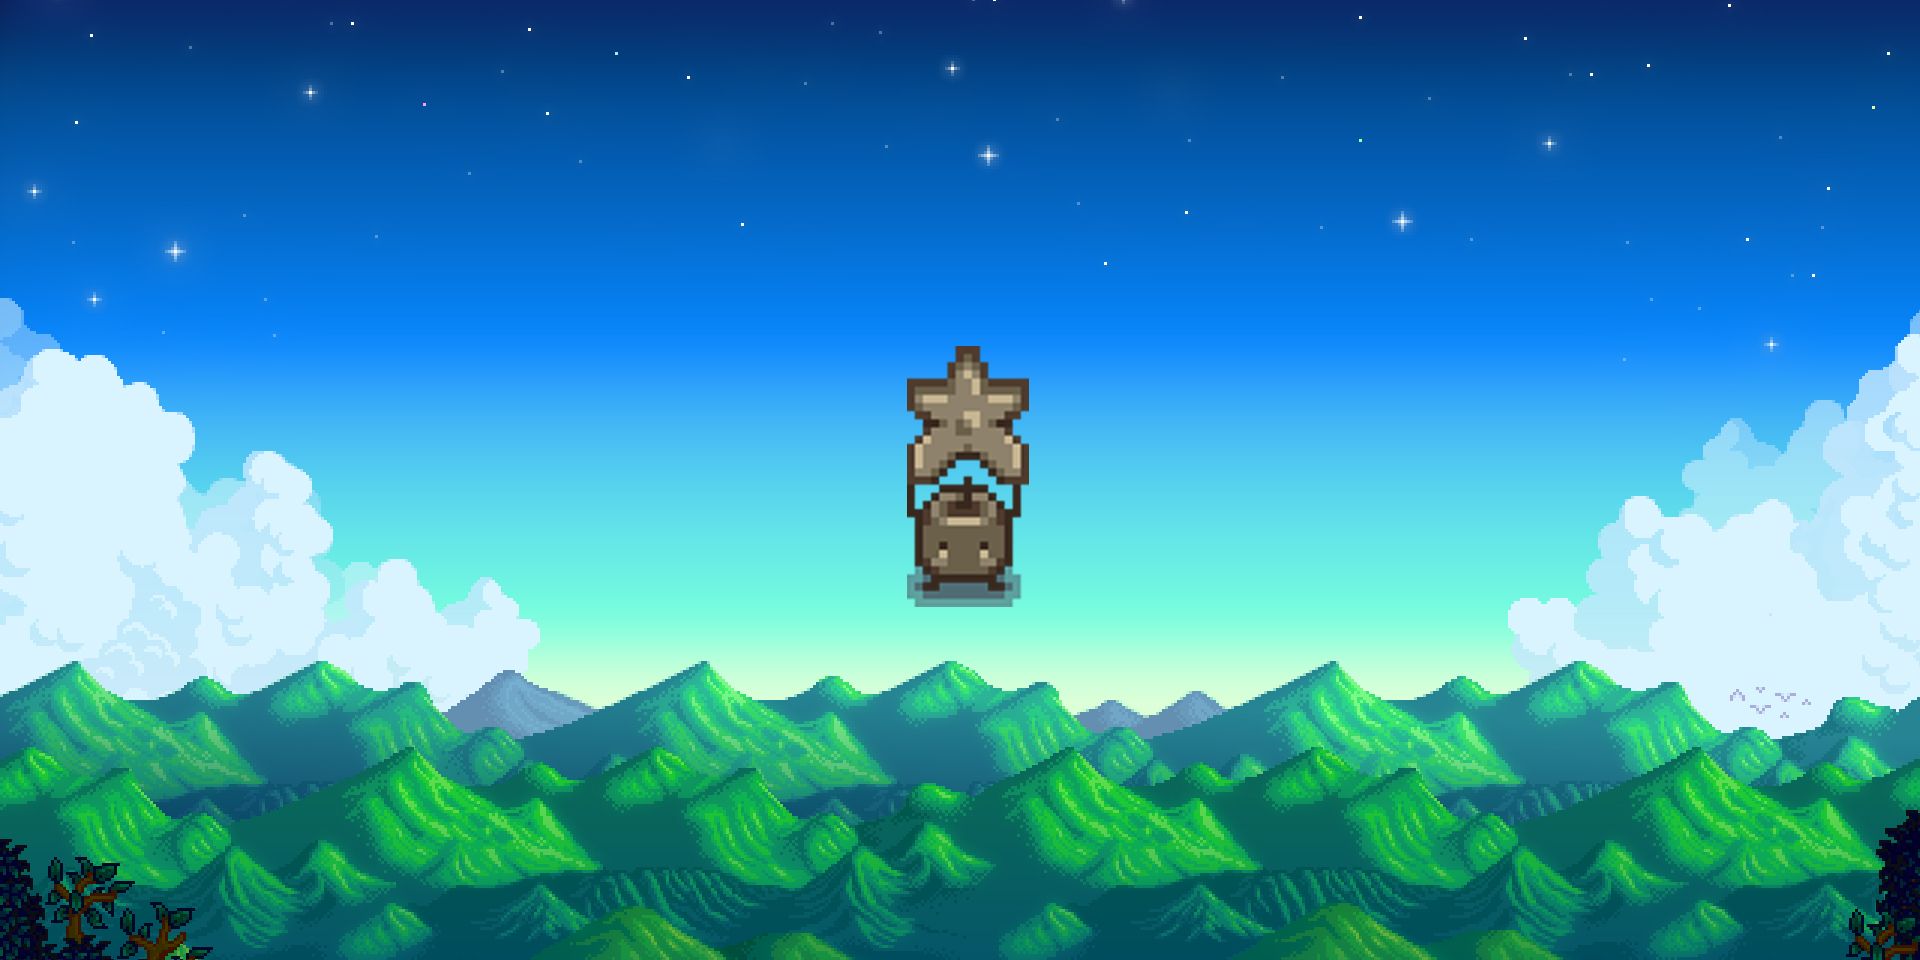 Stardew Valley Stone Junimo Statue on the background of the mountain